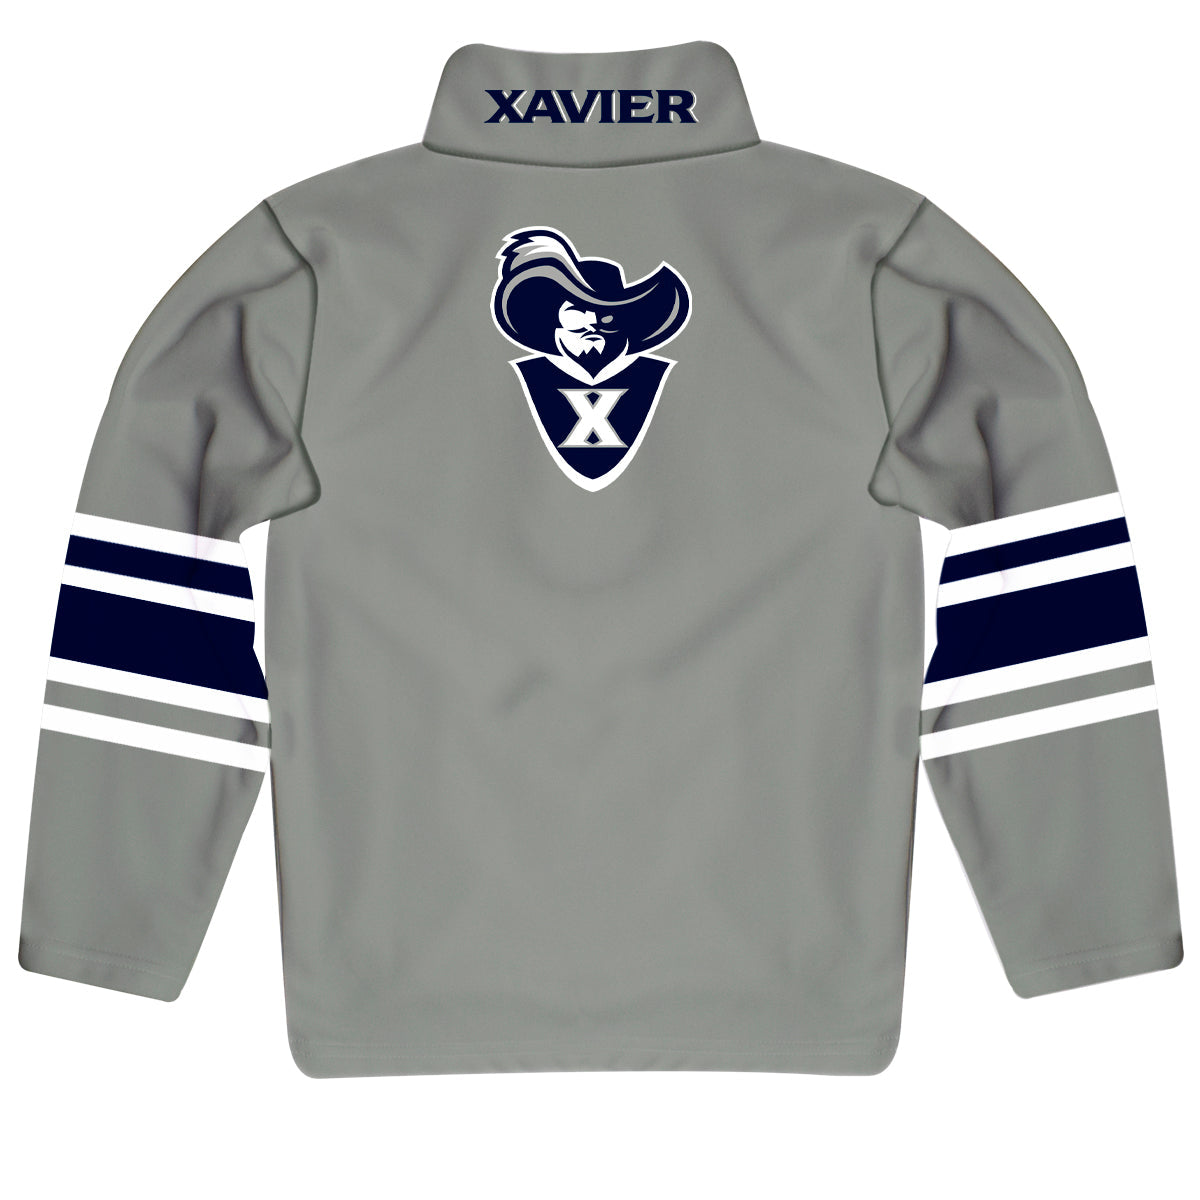 Xavier Musketeers Game Day Gray Quarter Zip Pullover for Infants Toddlers by Vive La Fete